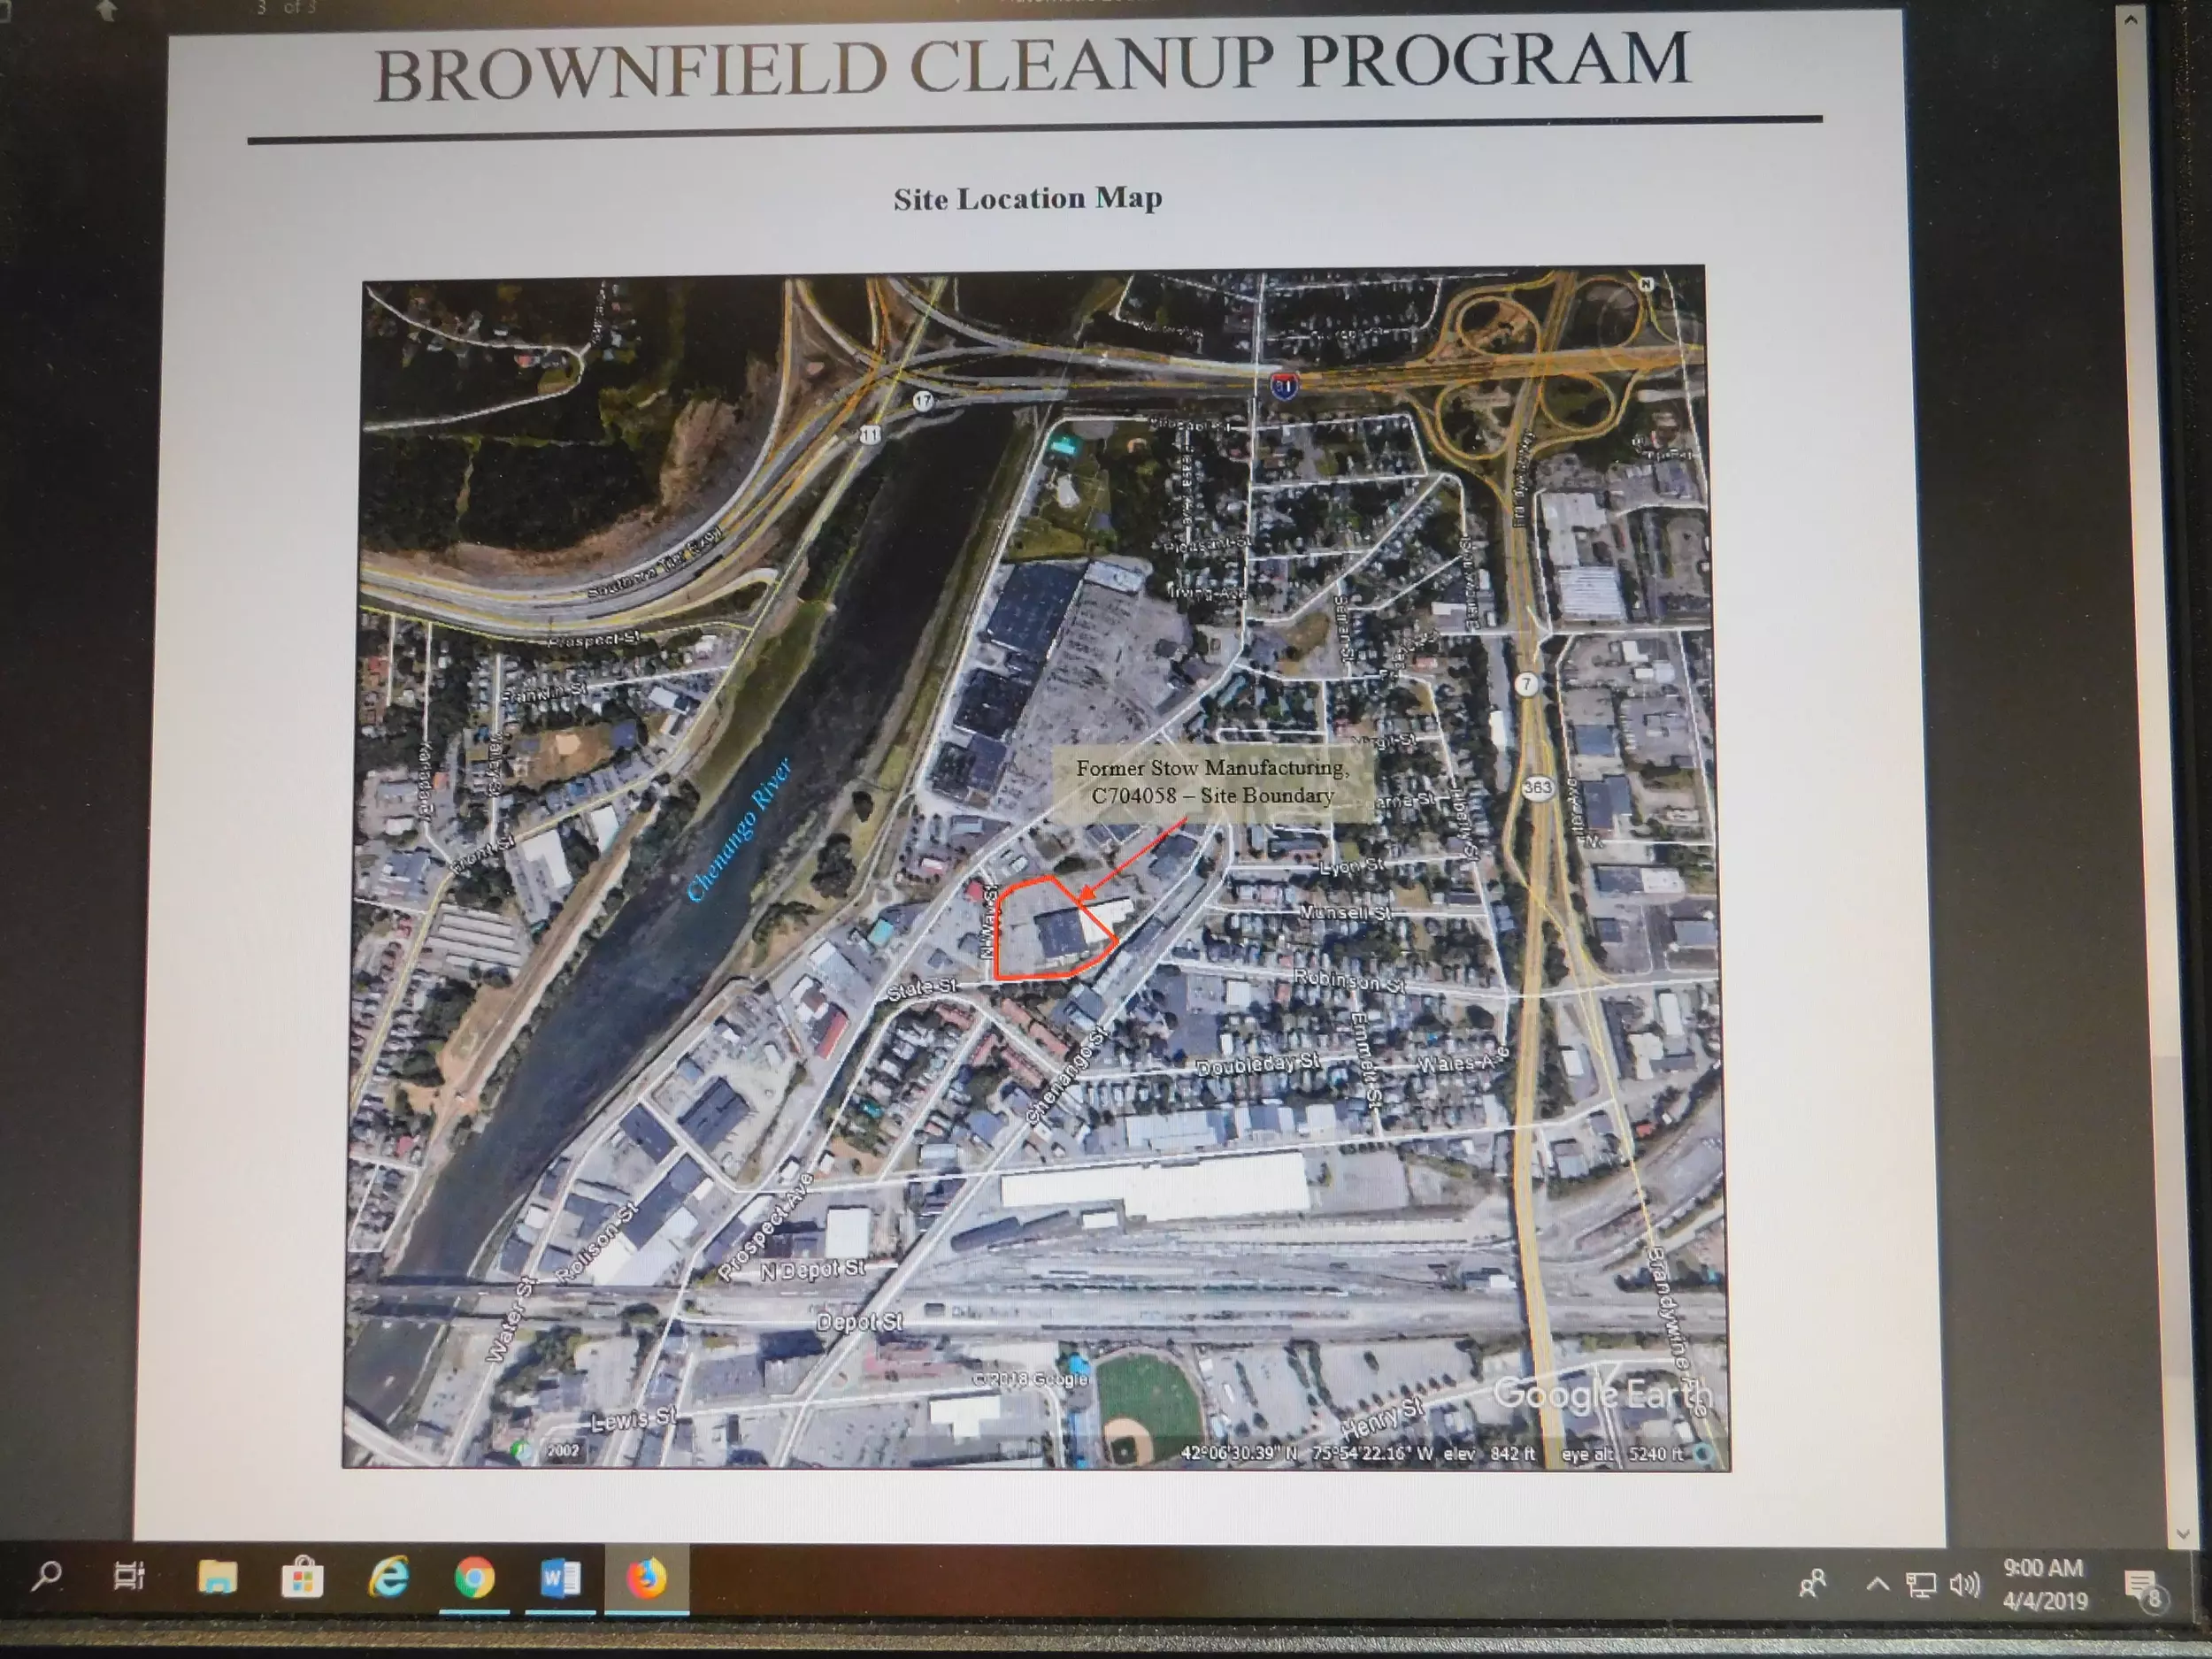 Cleanup to Start at Former Stow Manufacturing Site